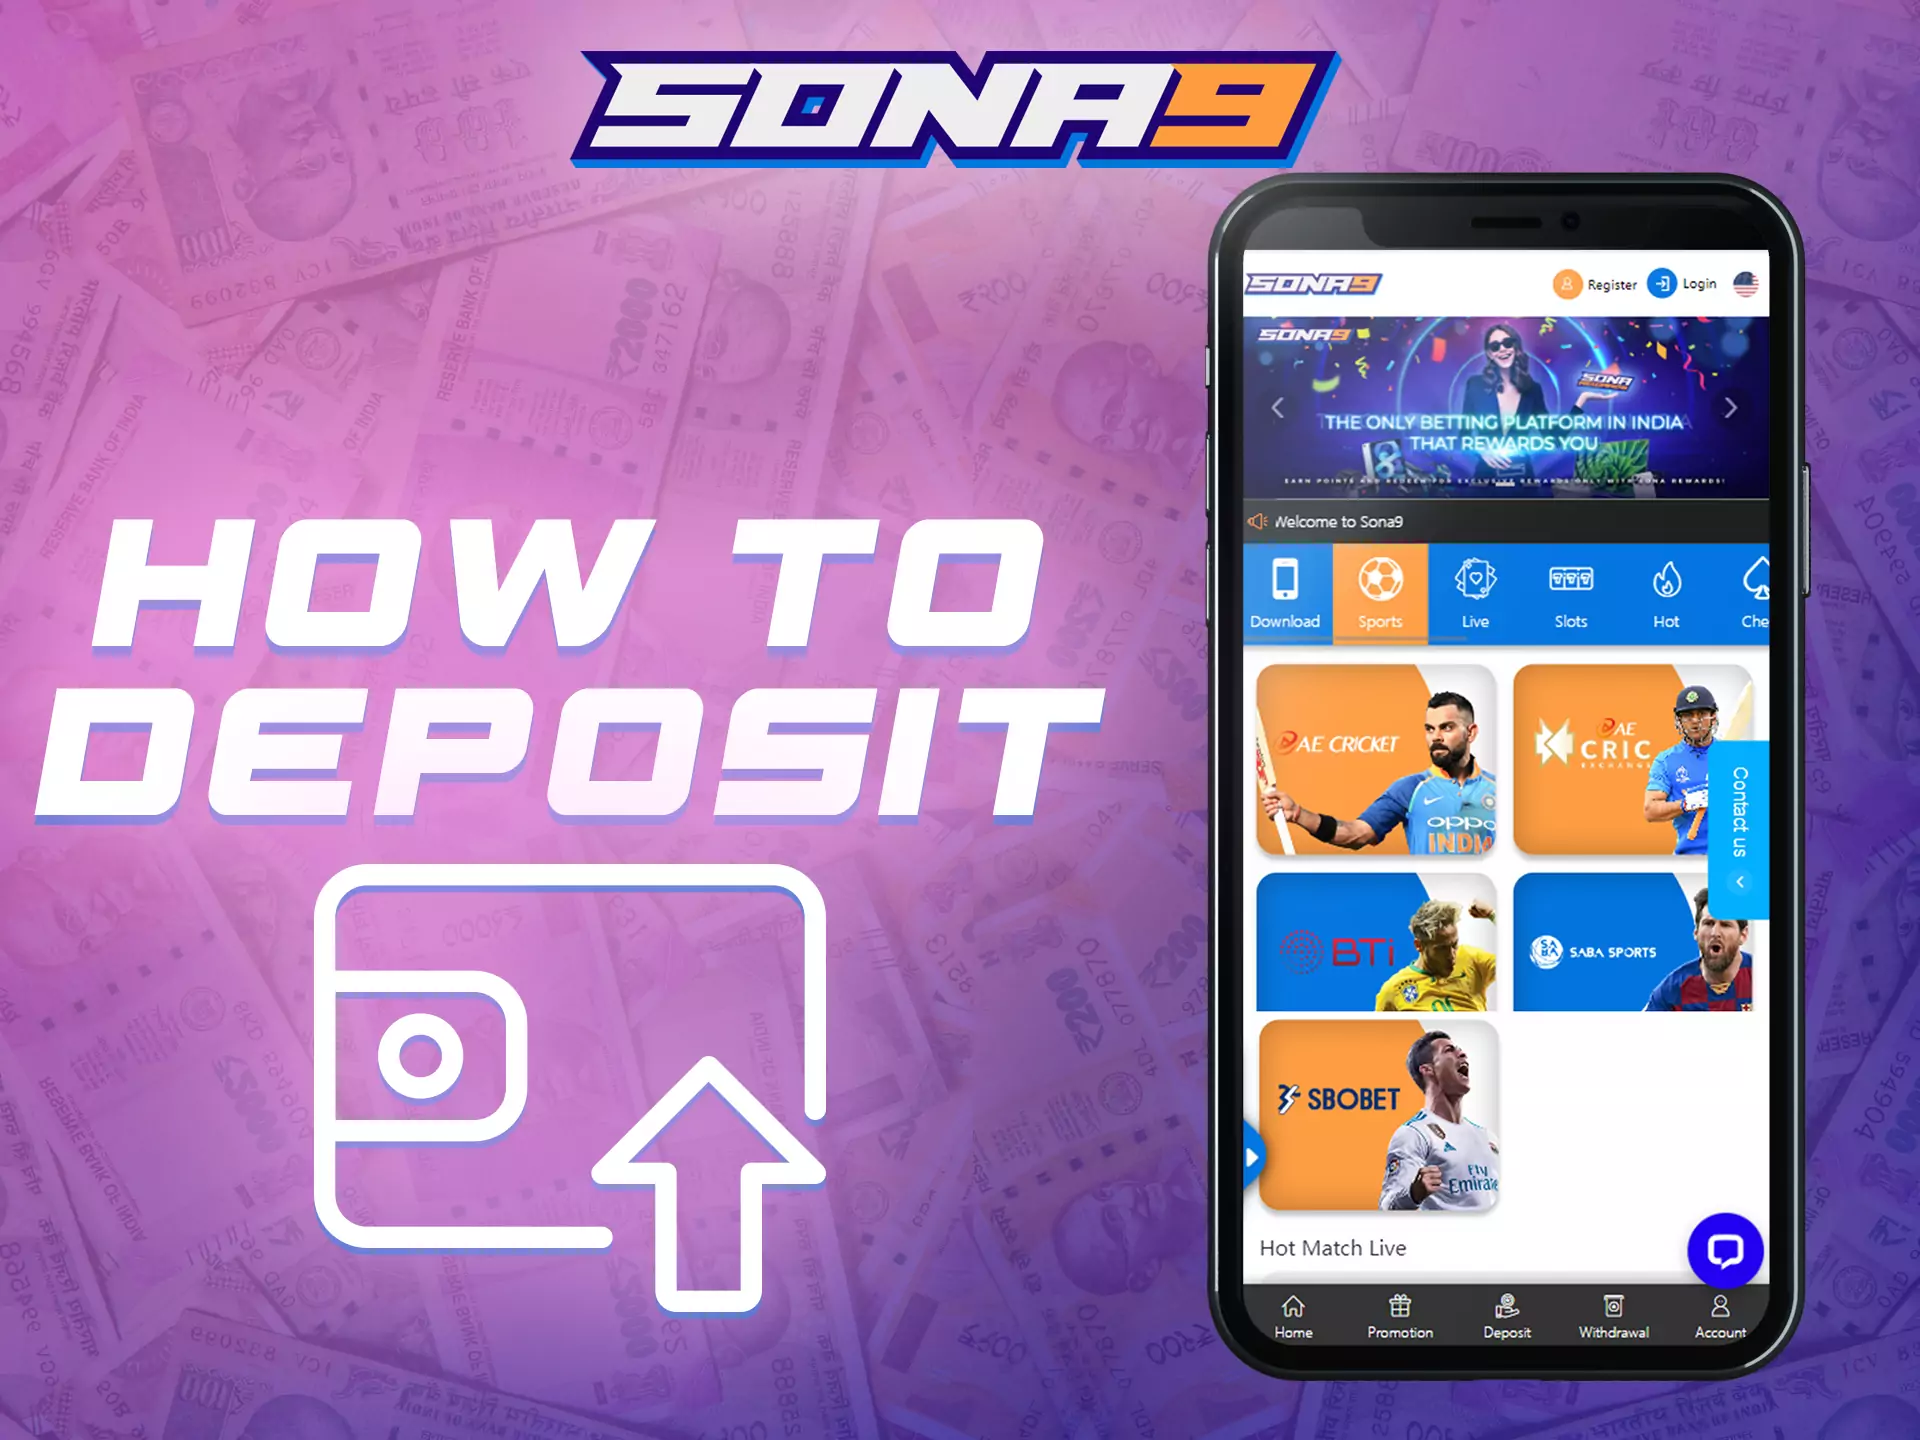 Top up your account in the Sona9 app to start betting.